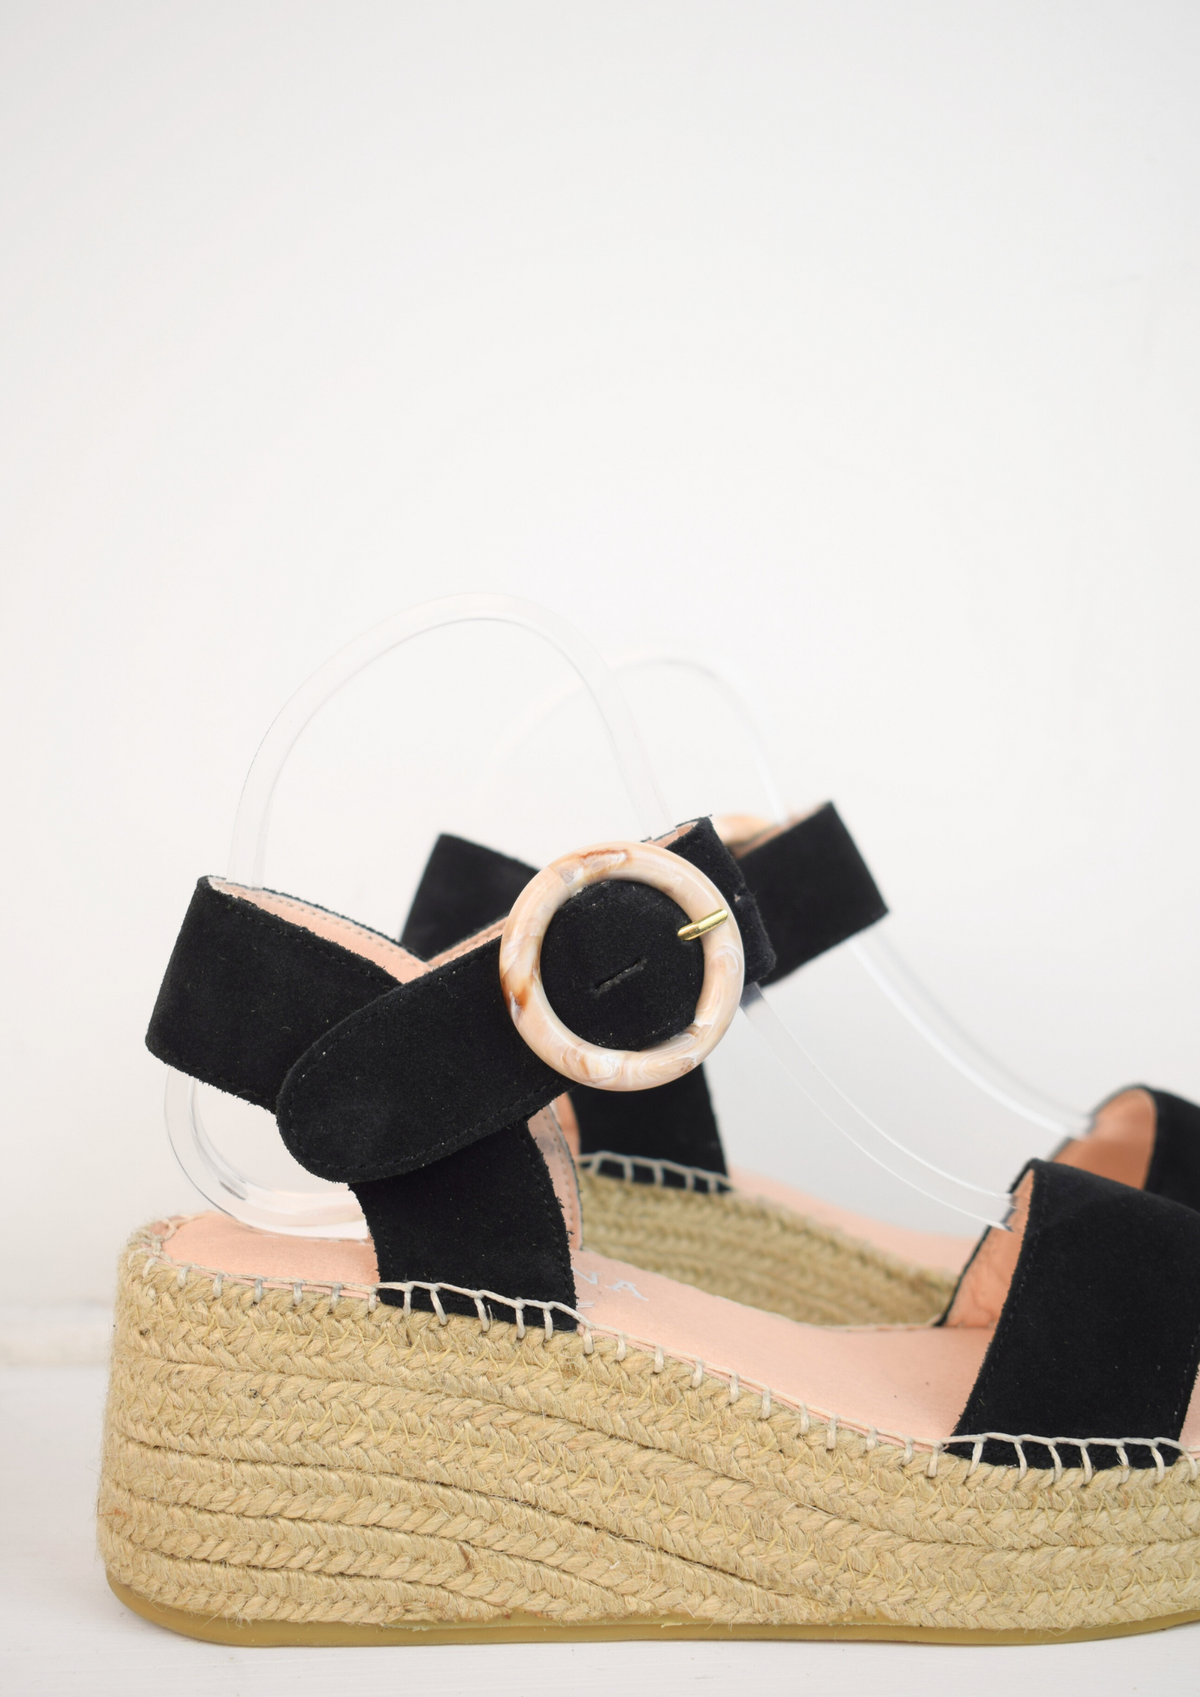 Black flatform sandals with buckles on the ankle strap 